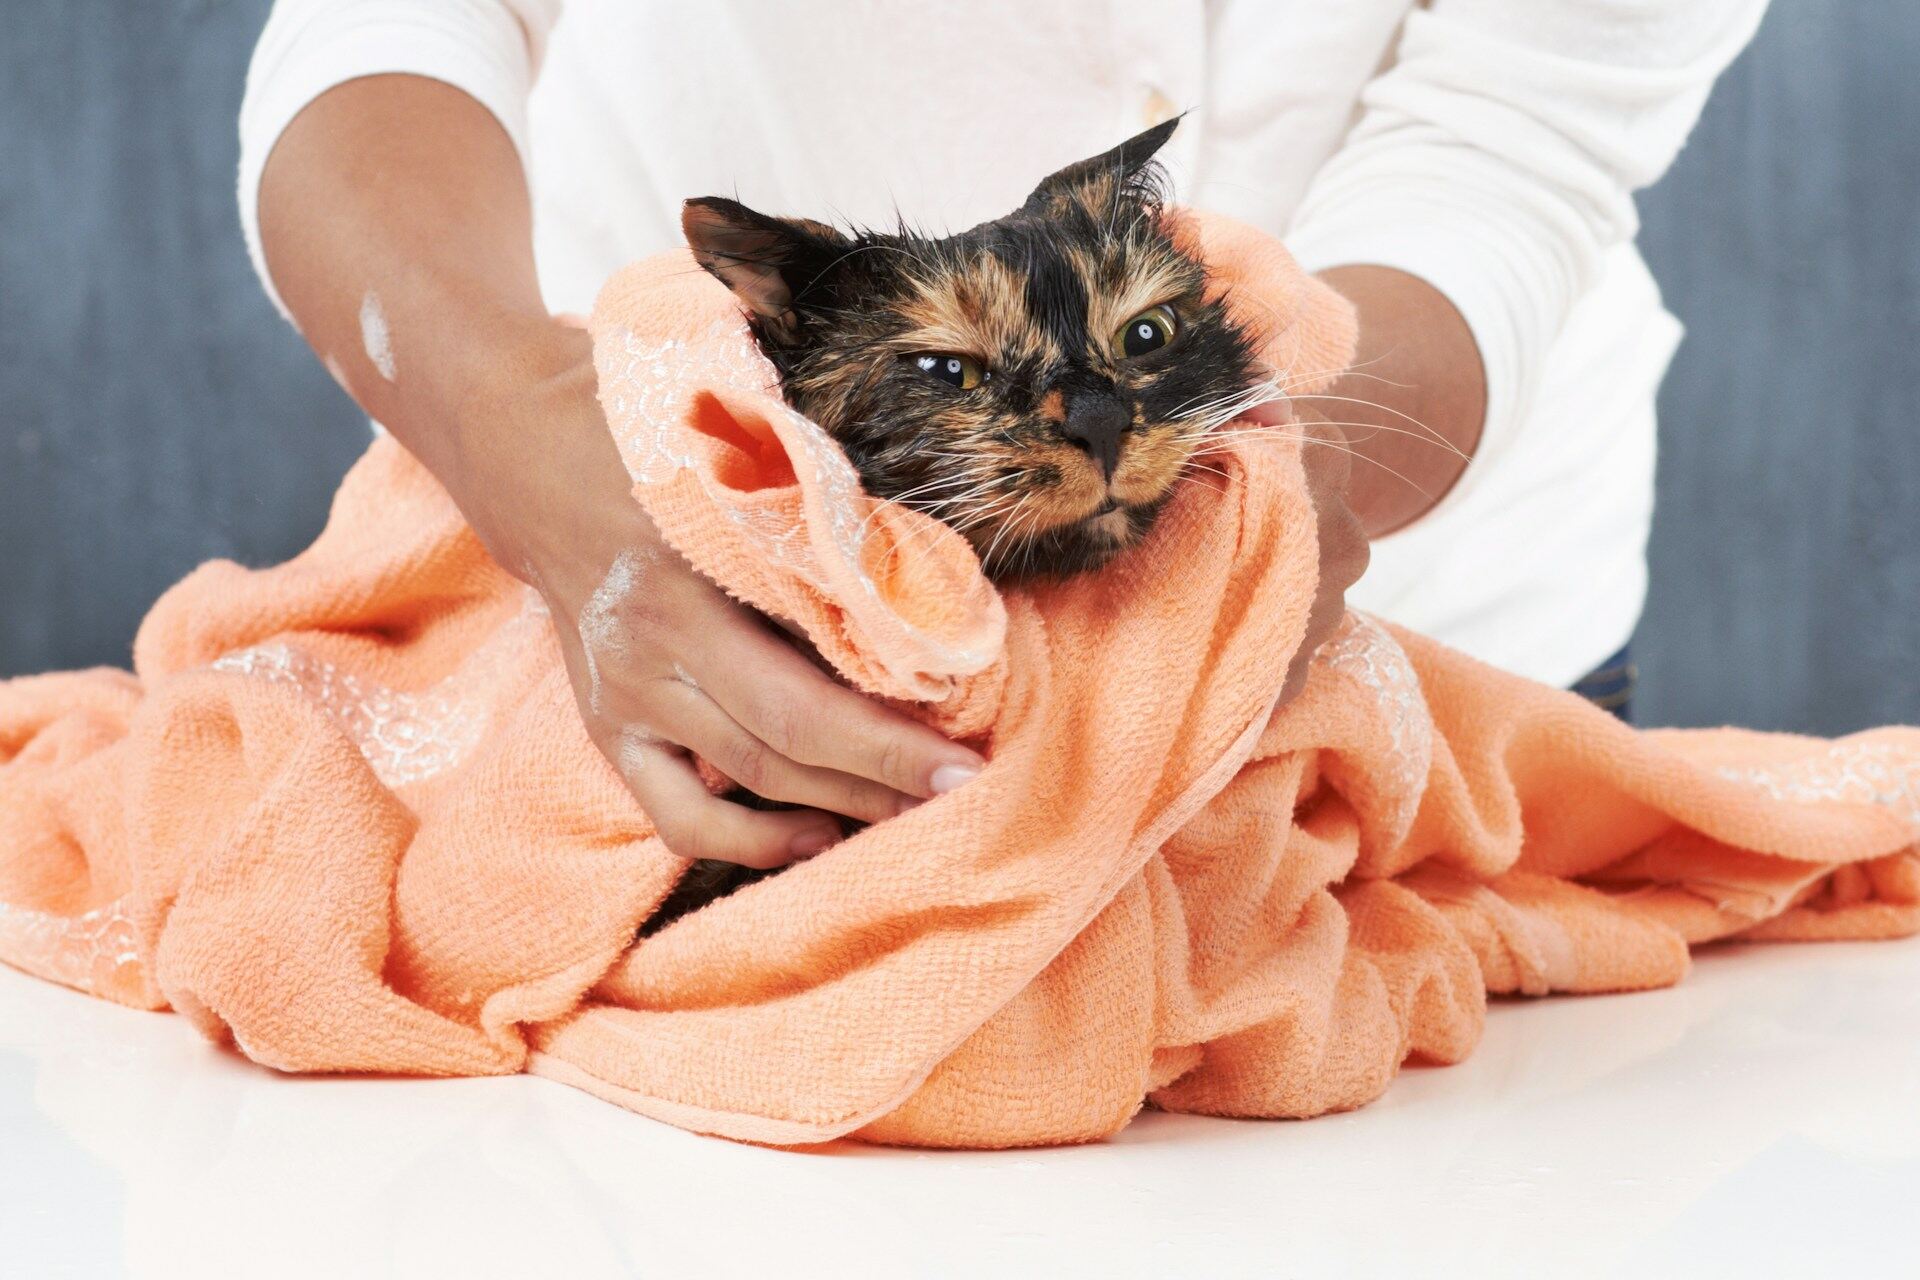 A woman wiping a wet cat with an orange towel